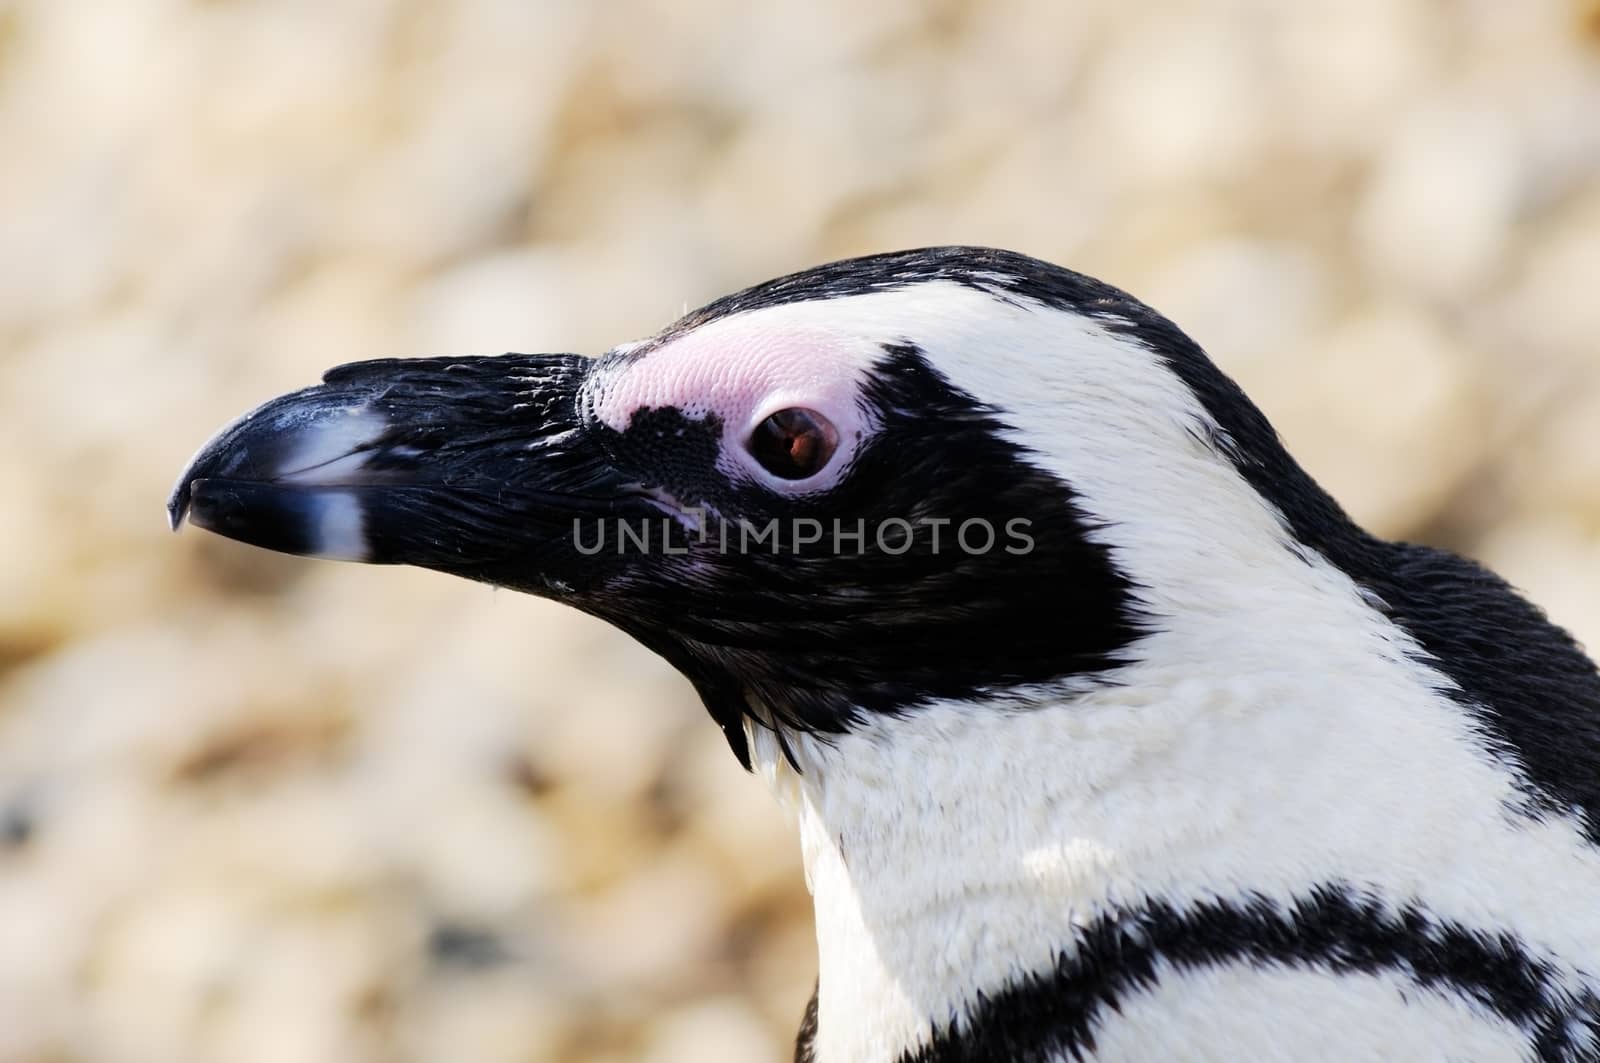 Penguin closeup profile by kmwphotography